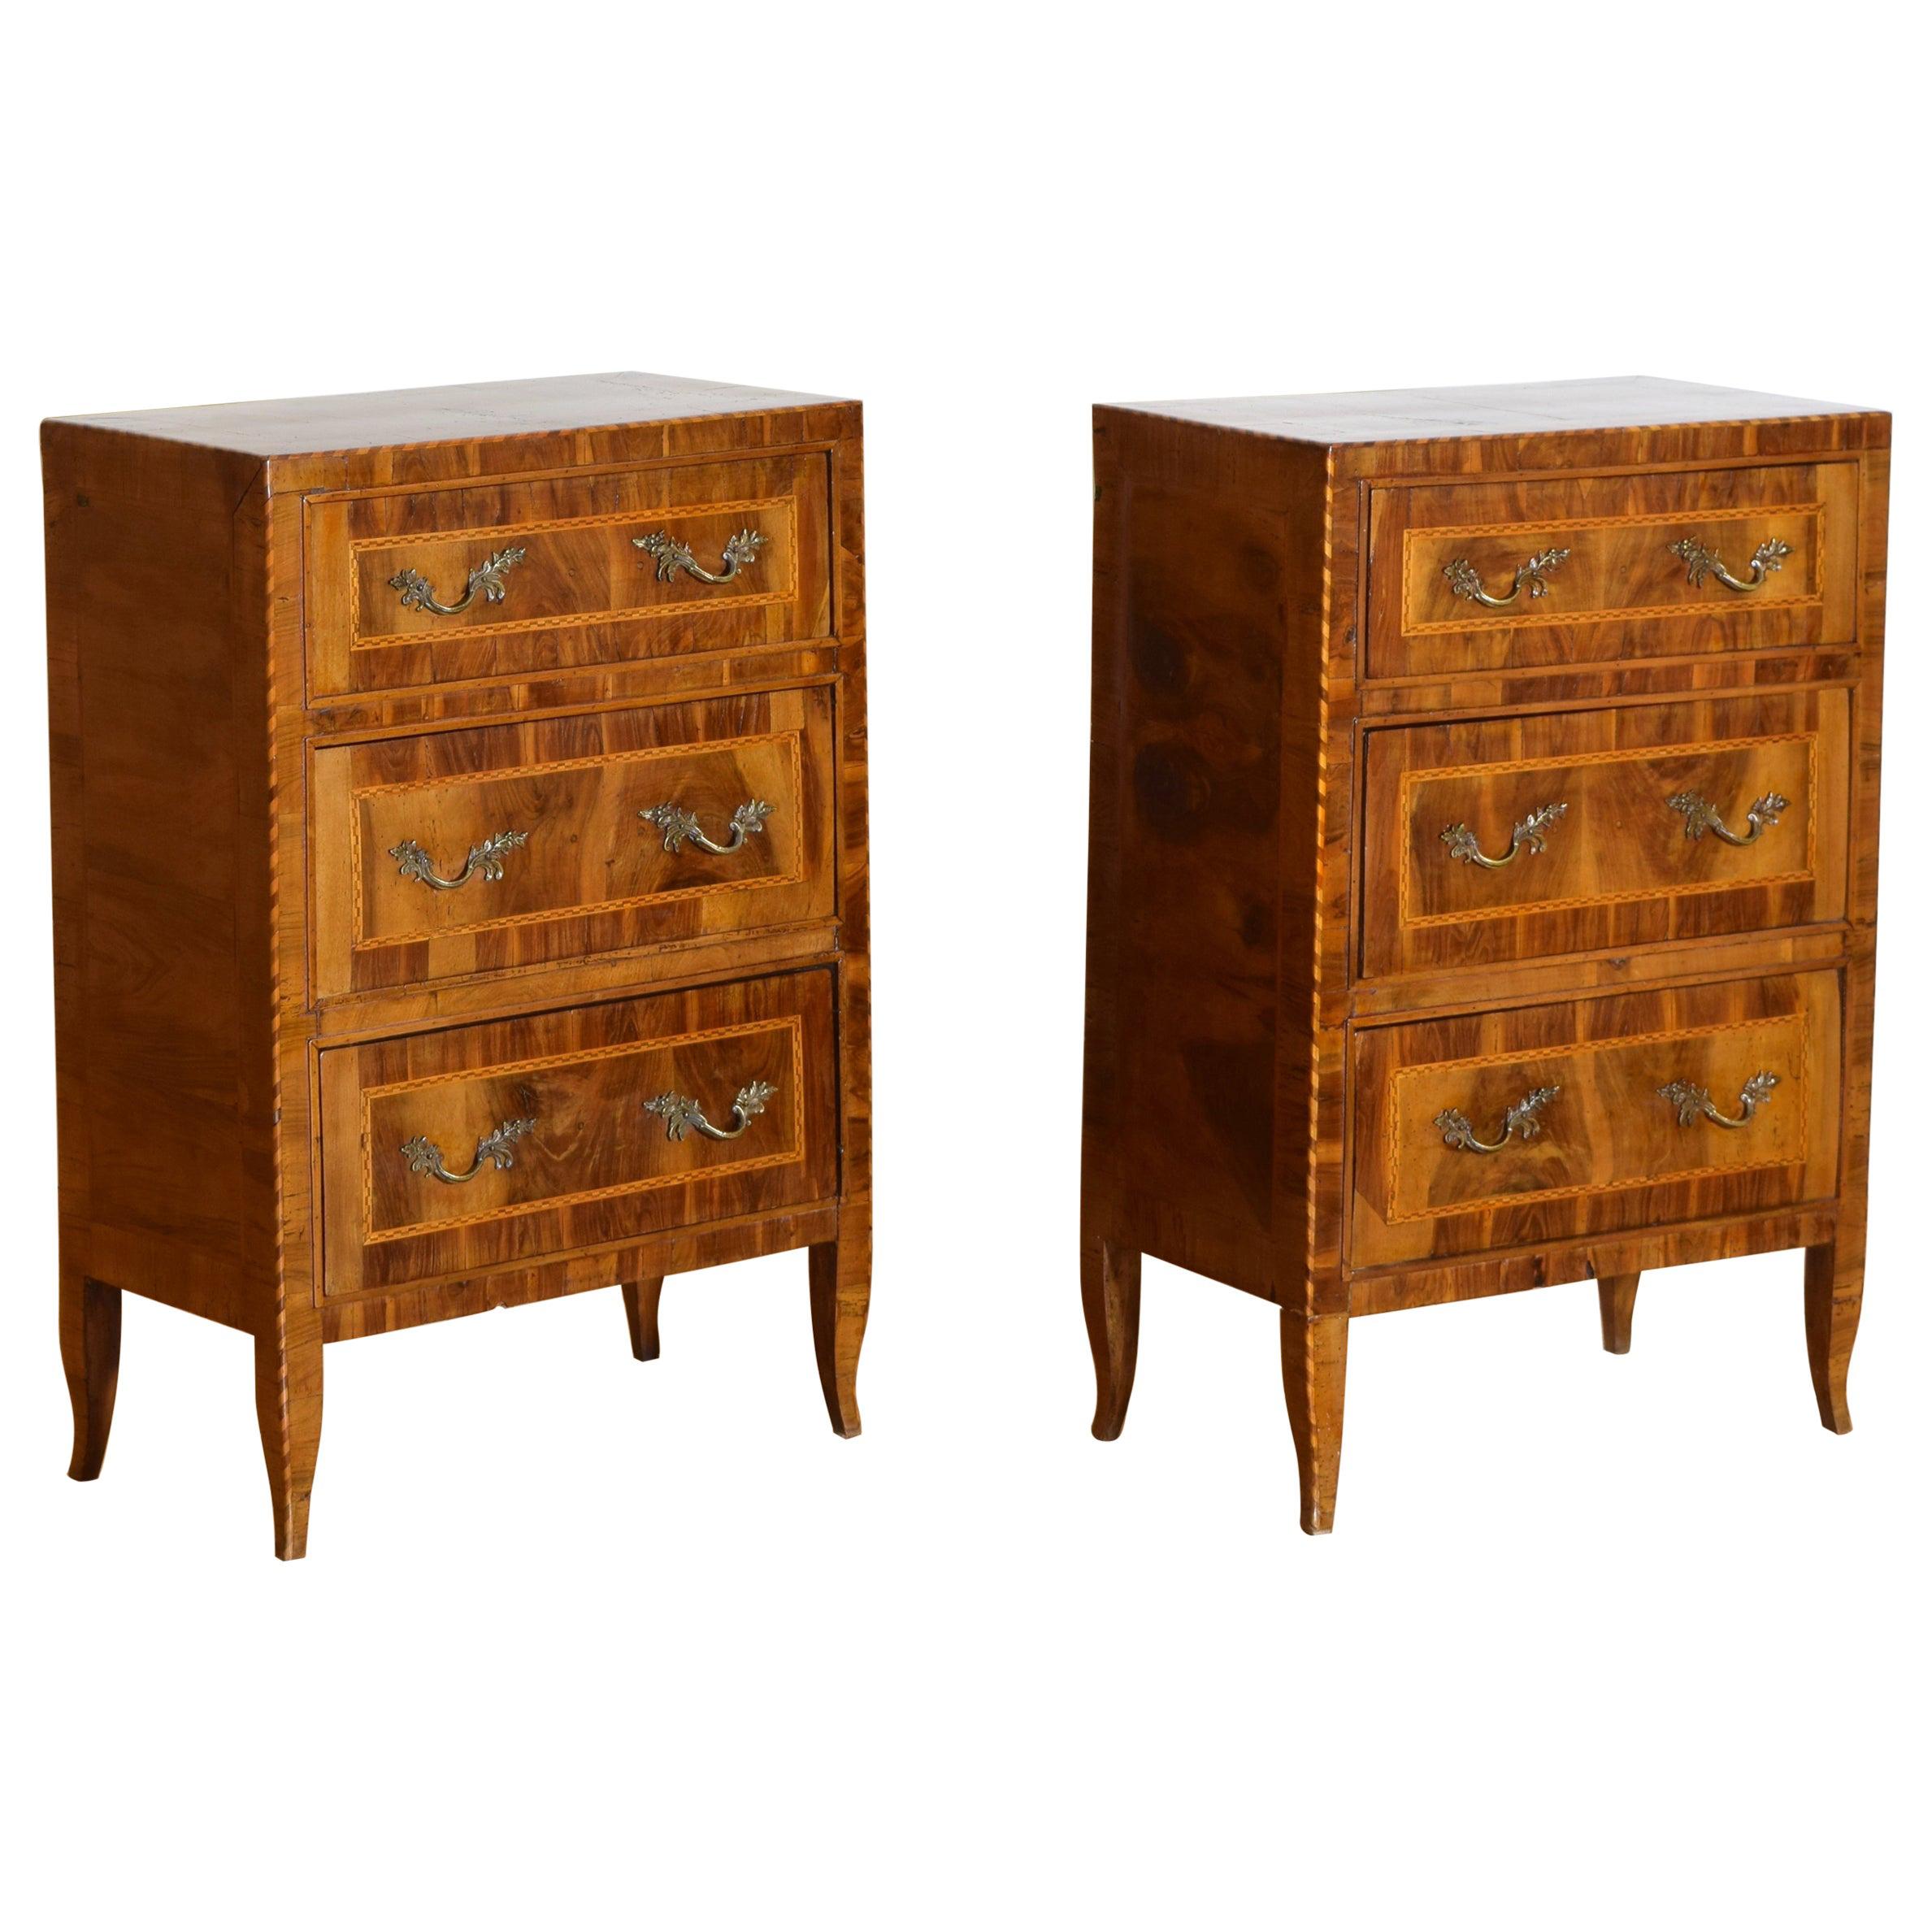 Italian LXVI Walnut Inlaid and Veneered 3 Drawer Bedside Commodes, Late 18th C.